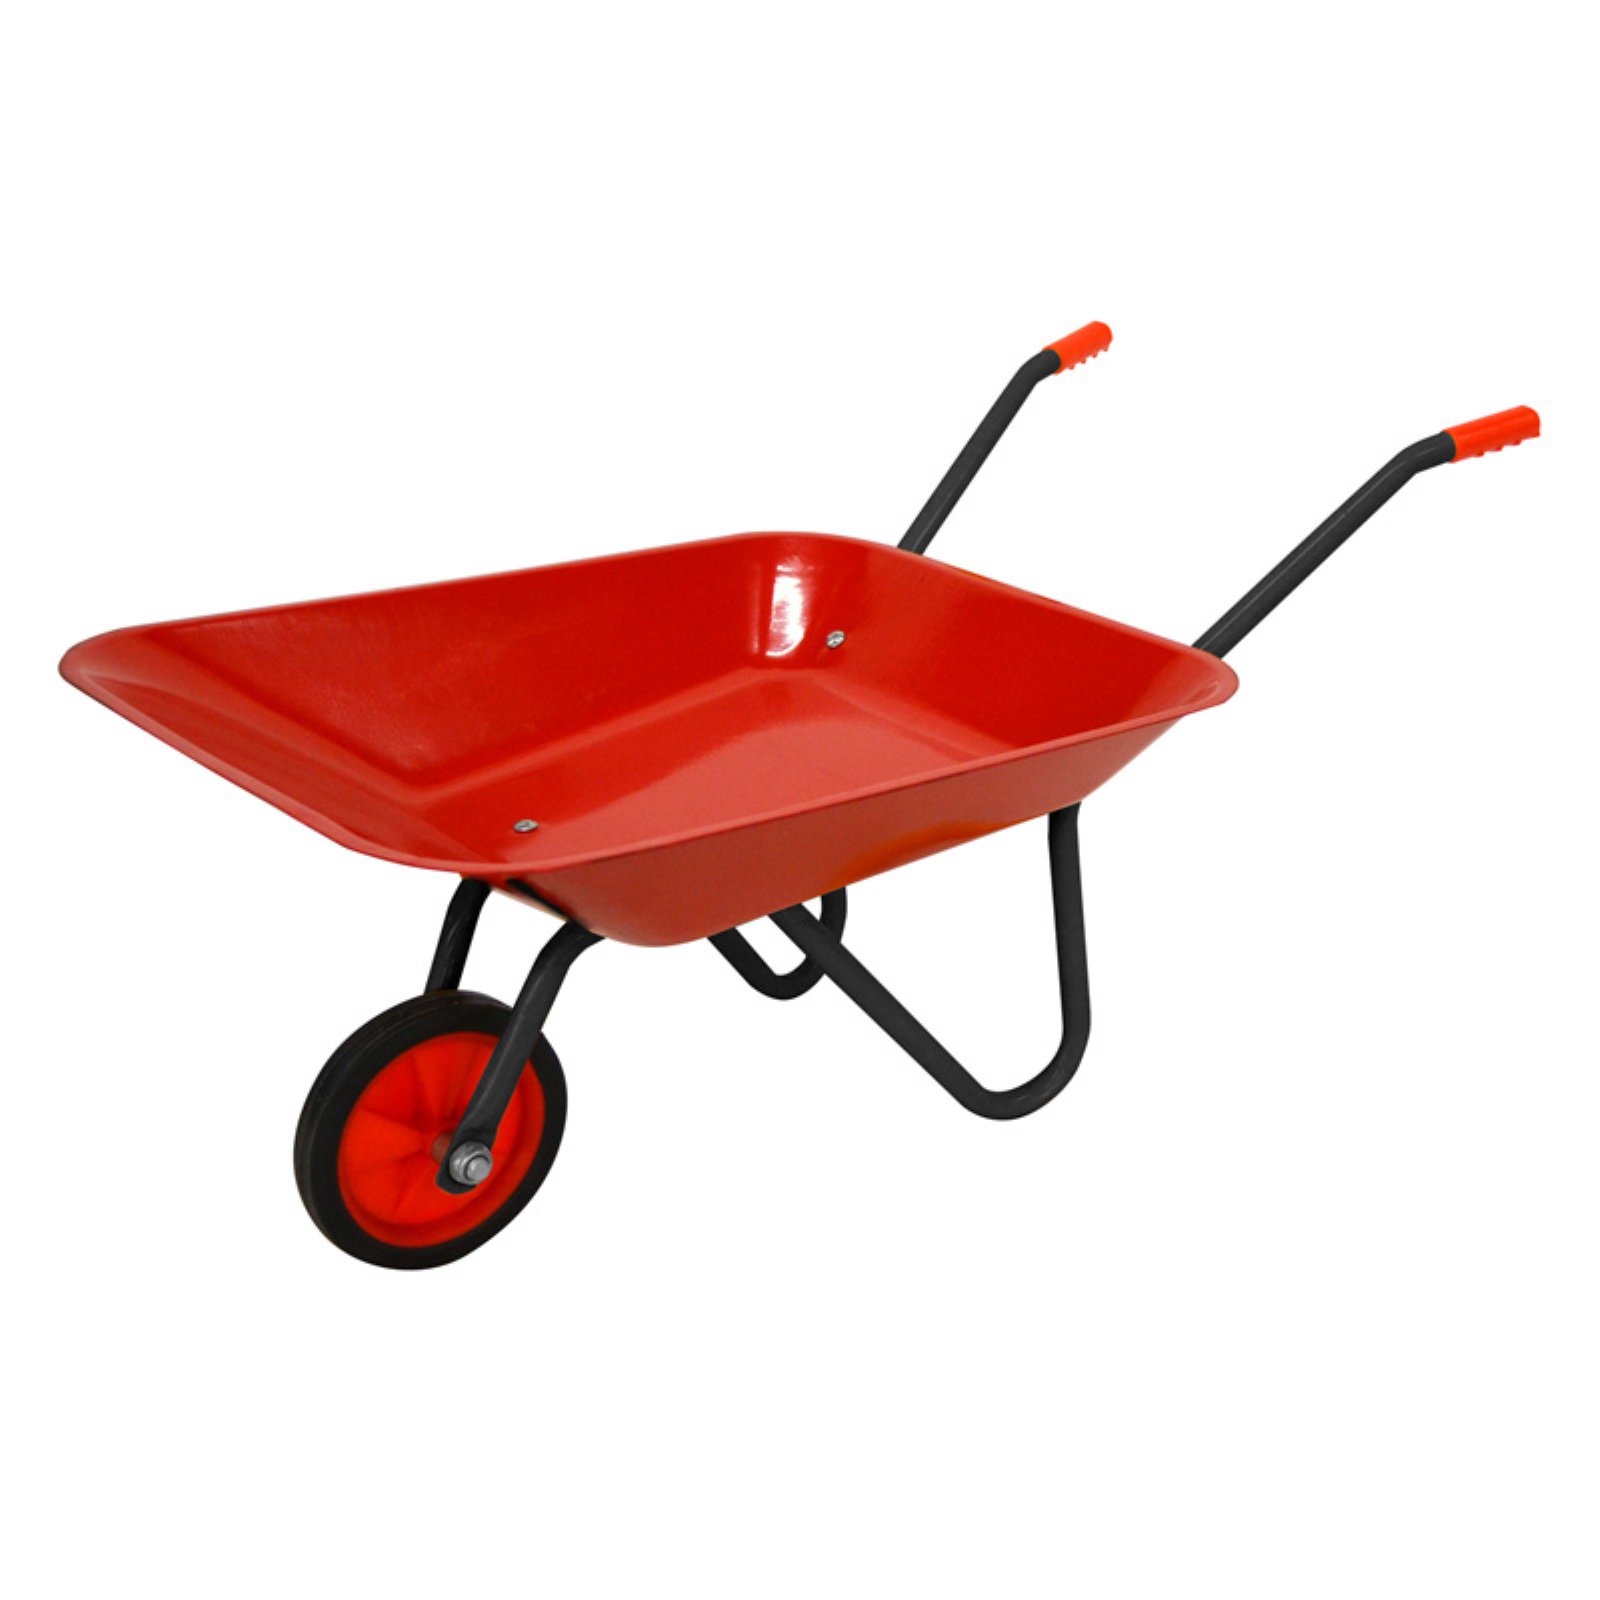 GENER8 Children's Red Metal Wheelbarrow - For ages 6 Years and up. - image 1 of 2